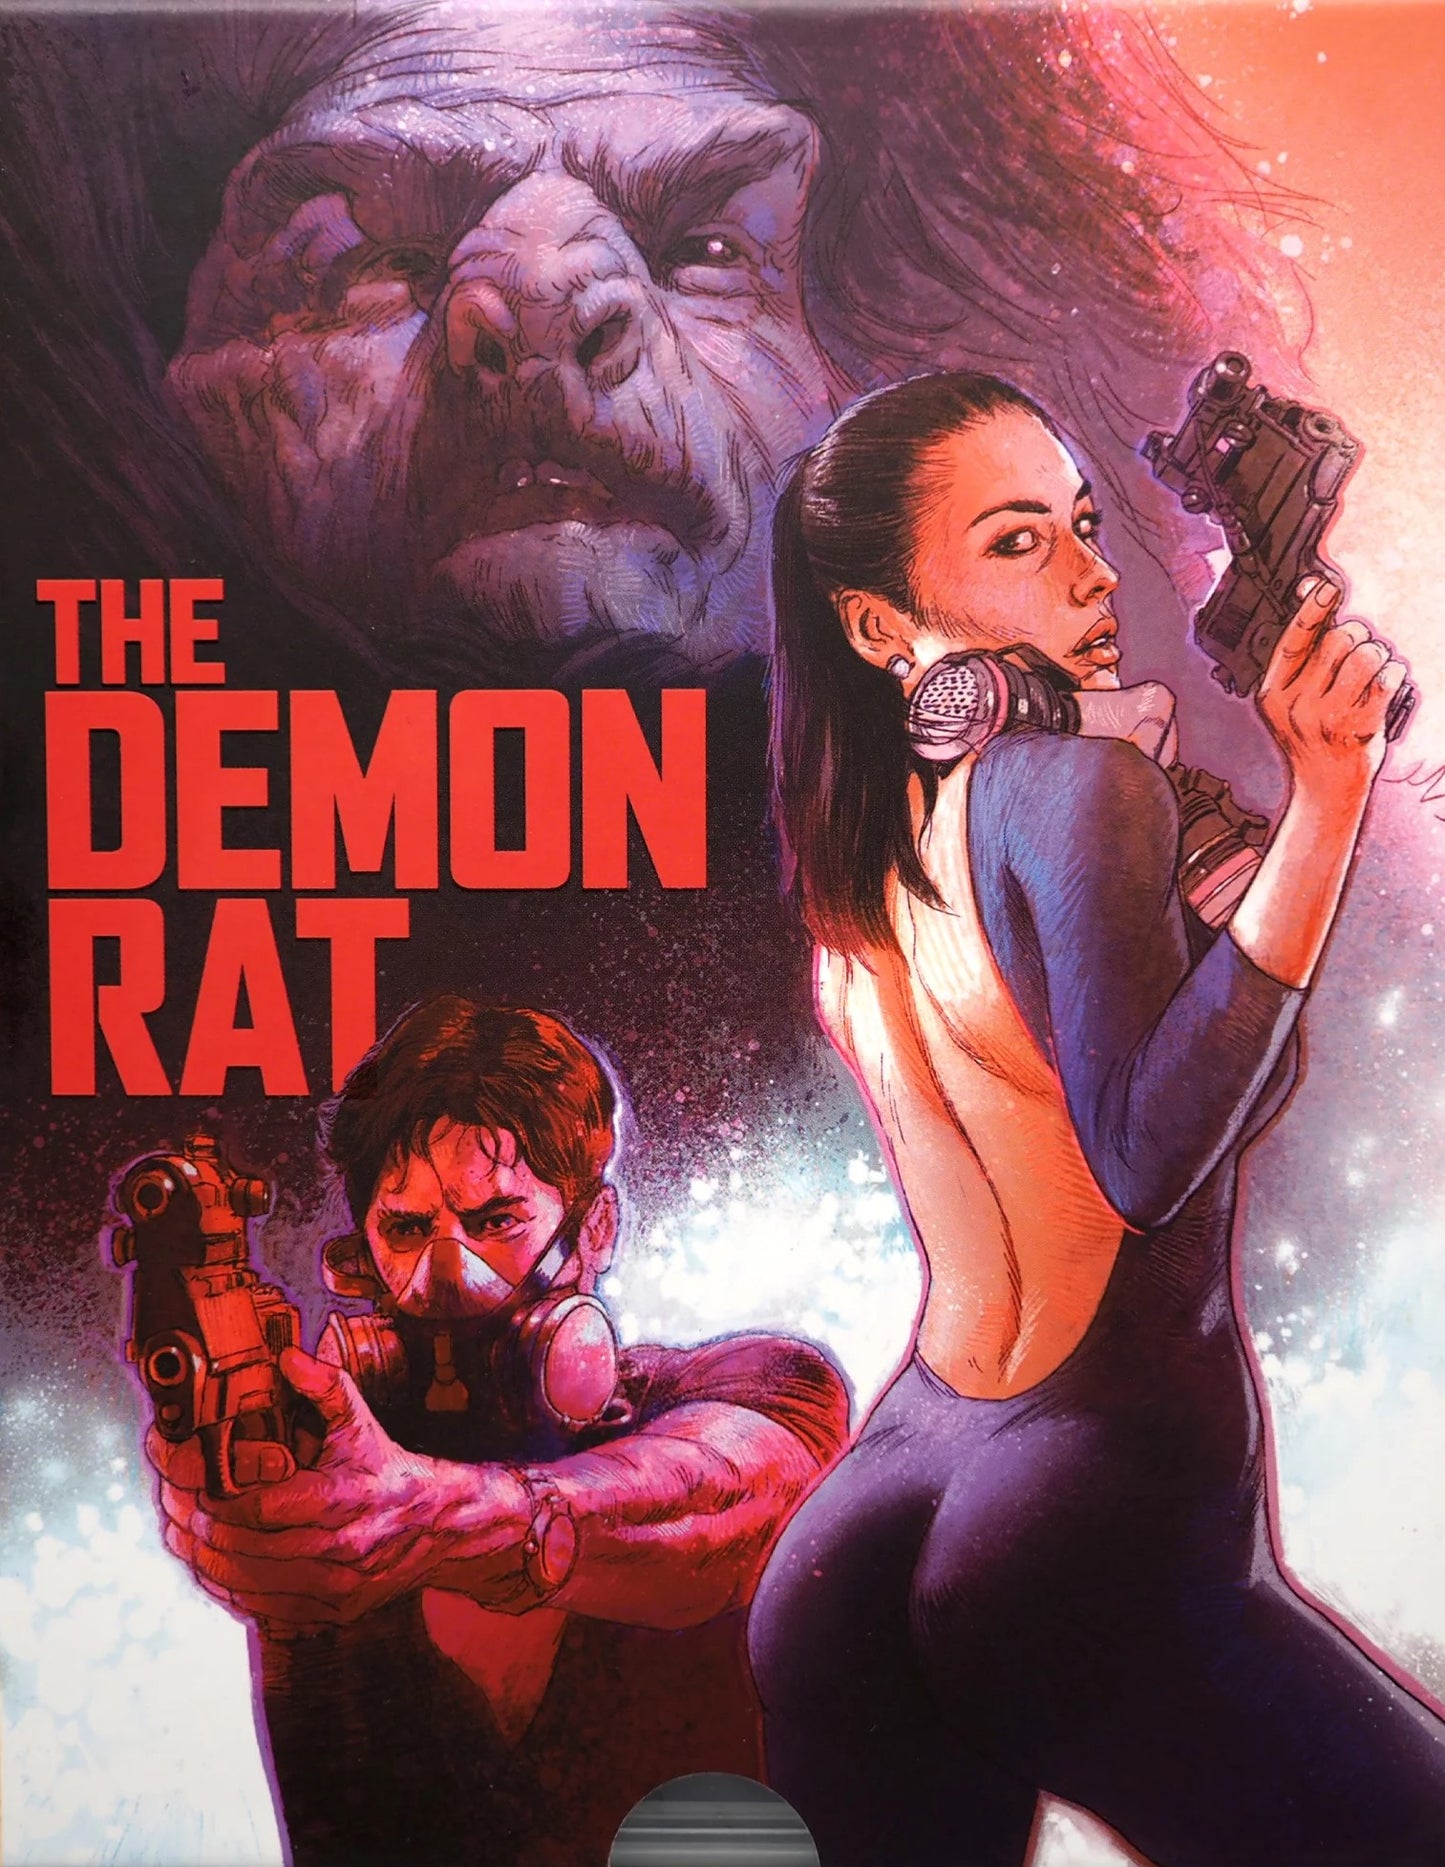 The Demon Rat Limited Edition Vinegar Syndrome Blu-Ray [NEW] [SLIPCOVER]